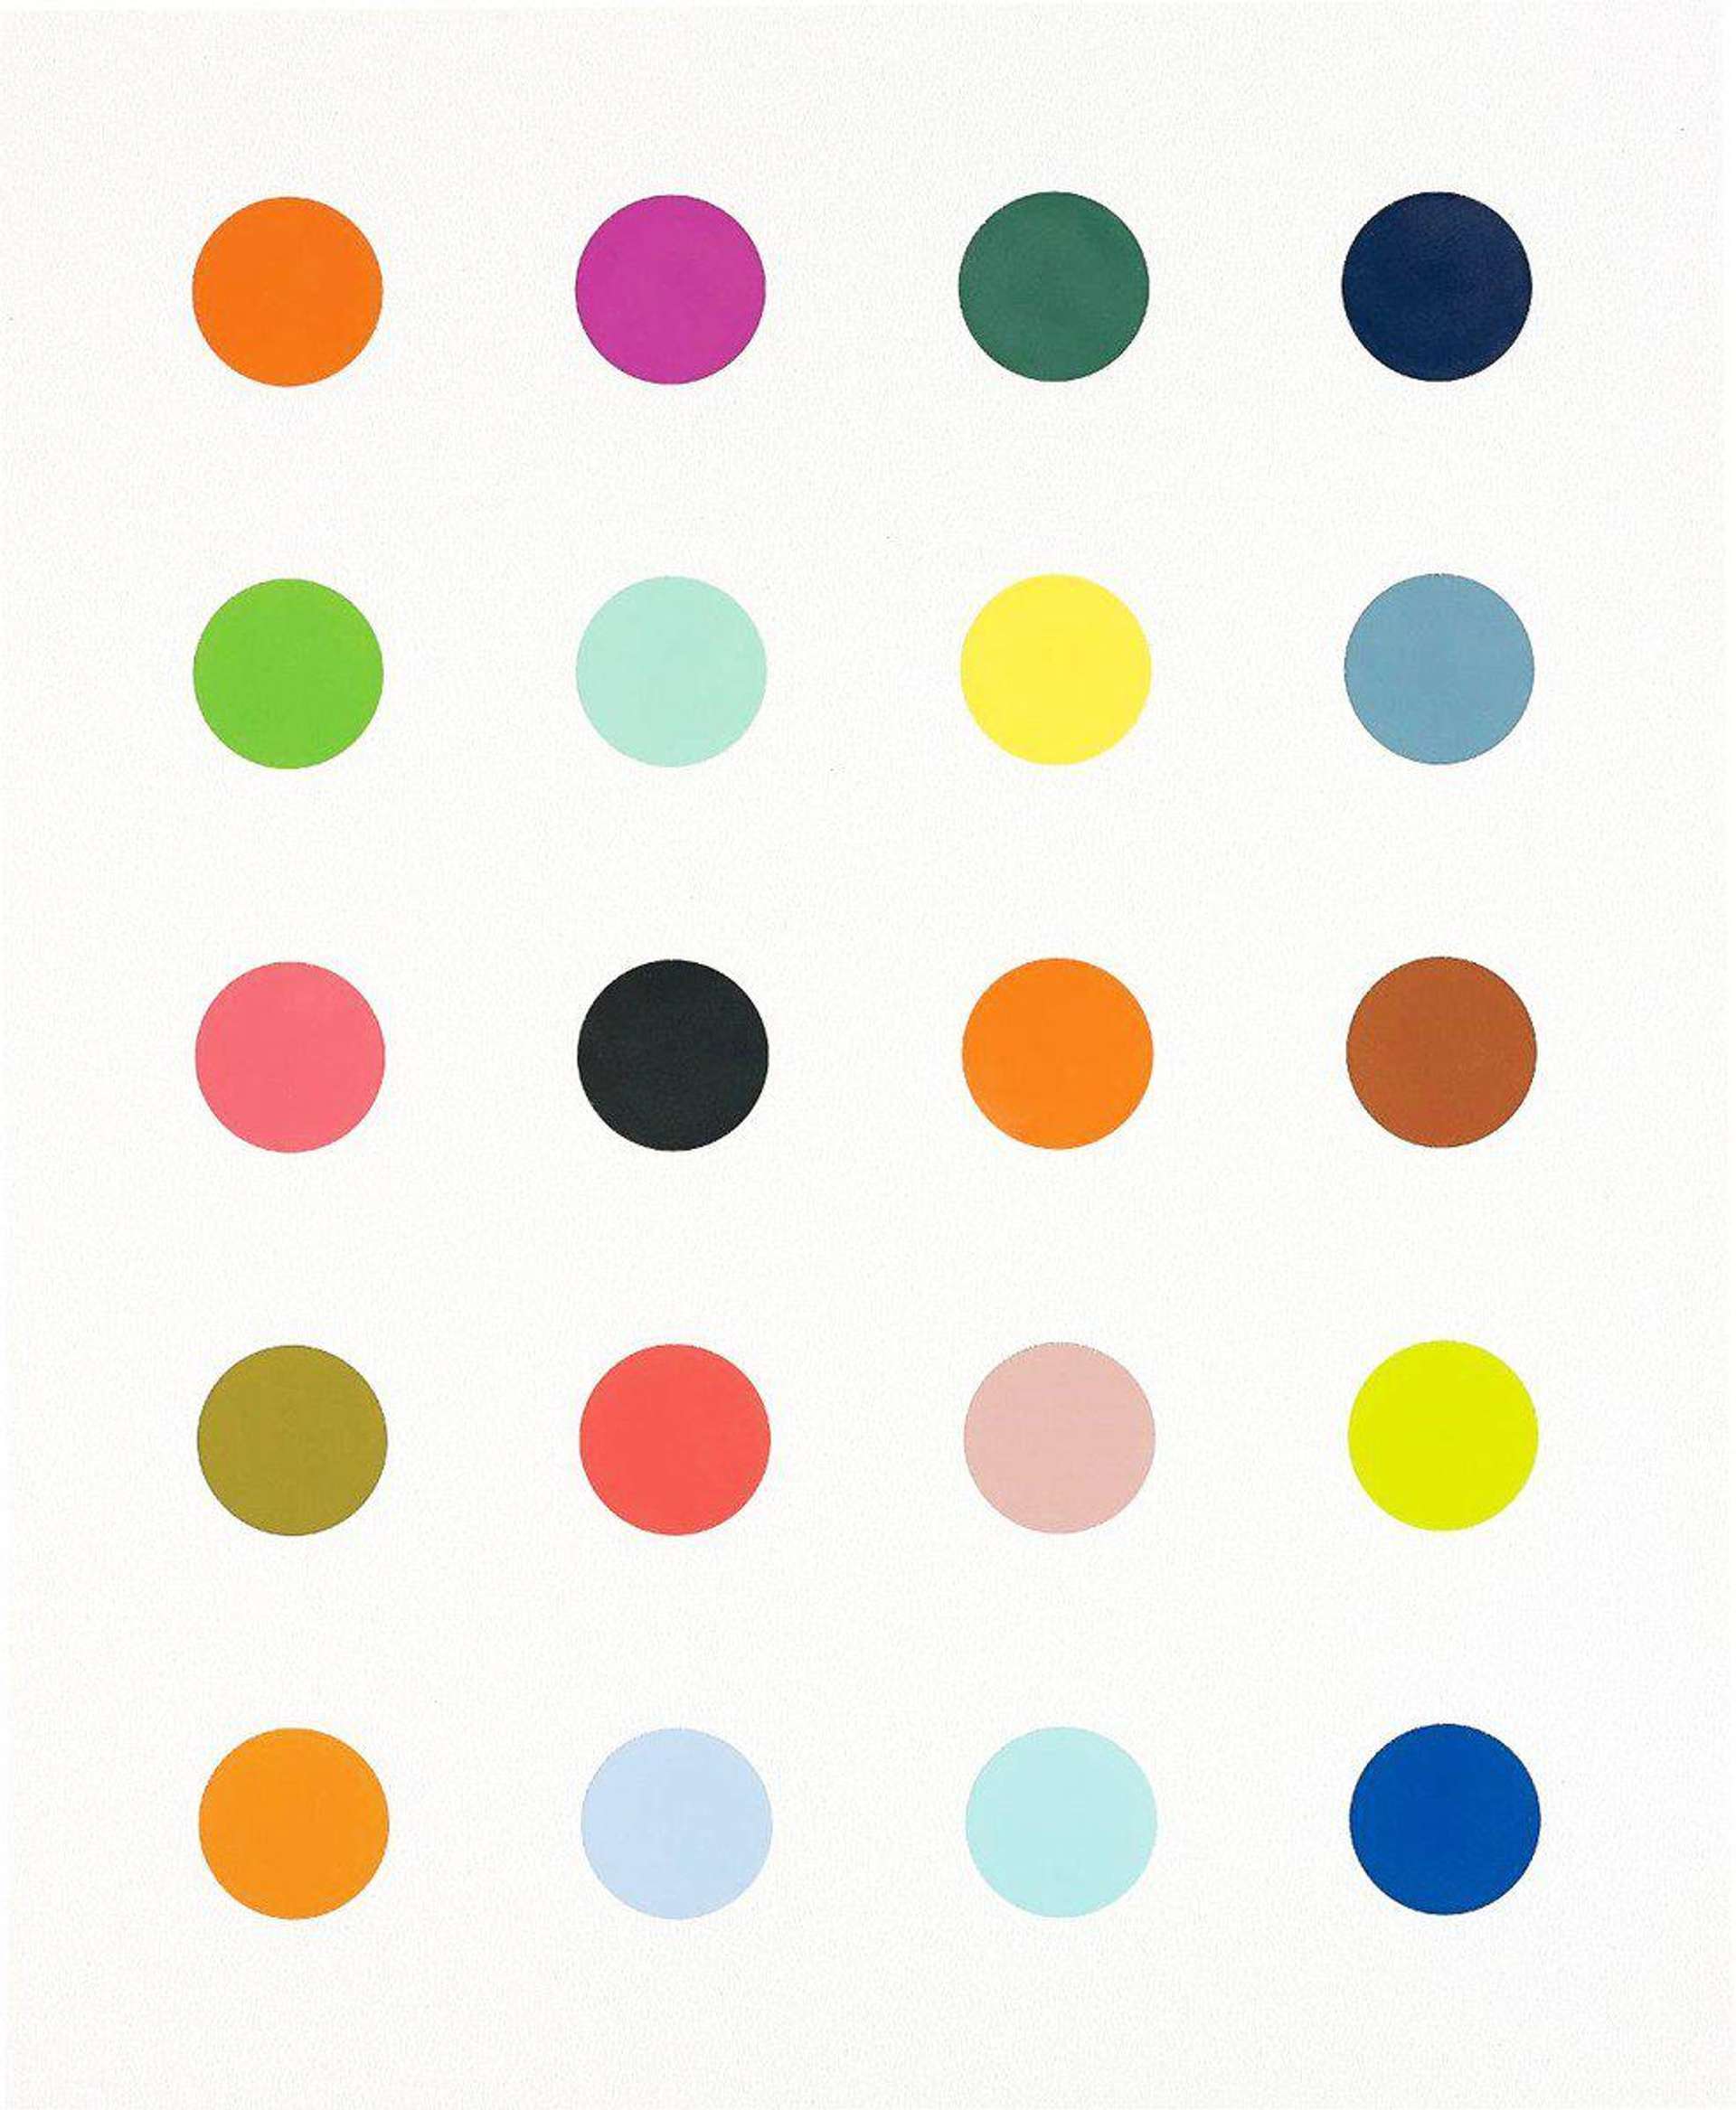 Five horizontal rows of with multi-coloured dots